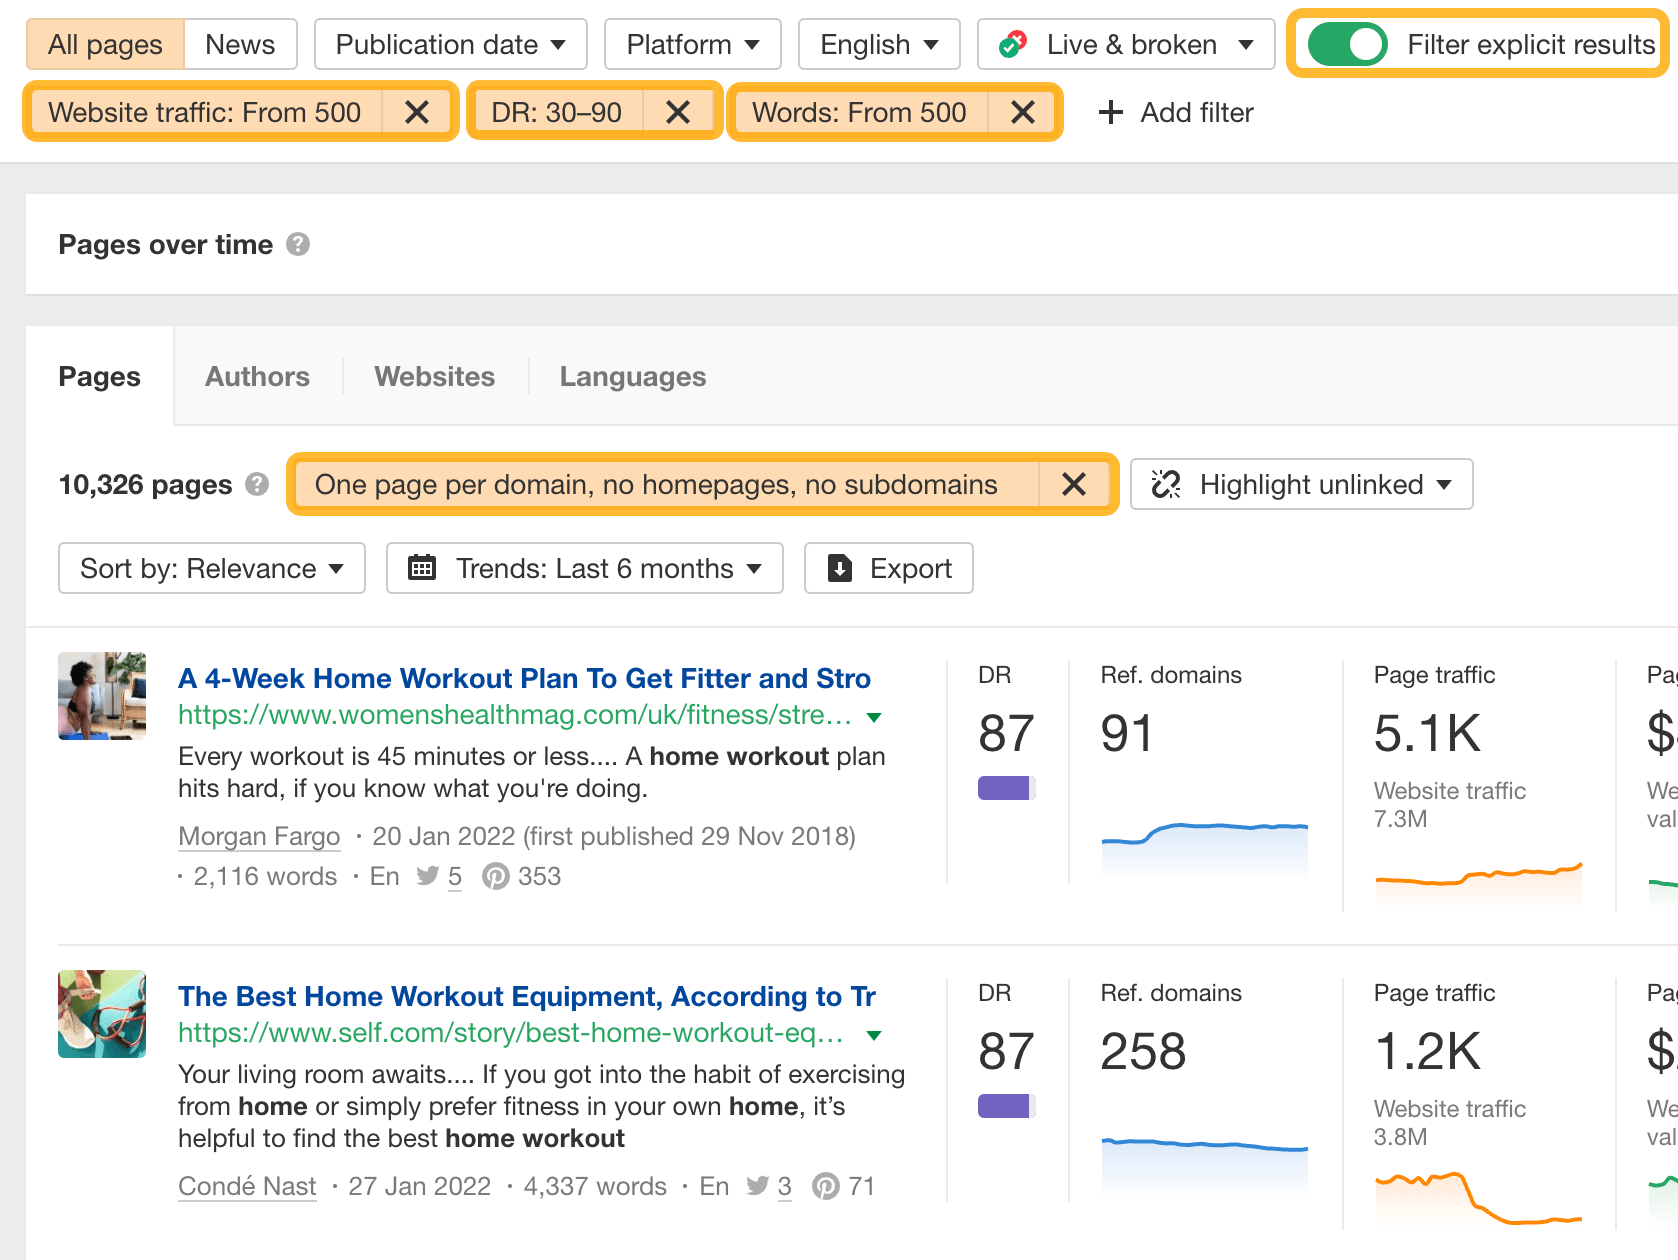 Ahrefs' Content Explorer with filters